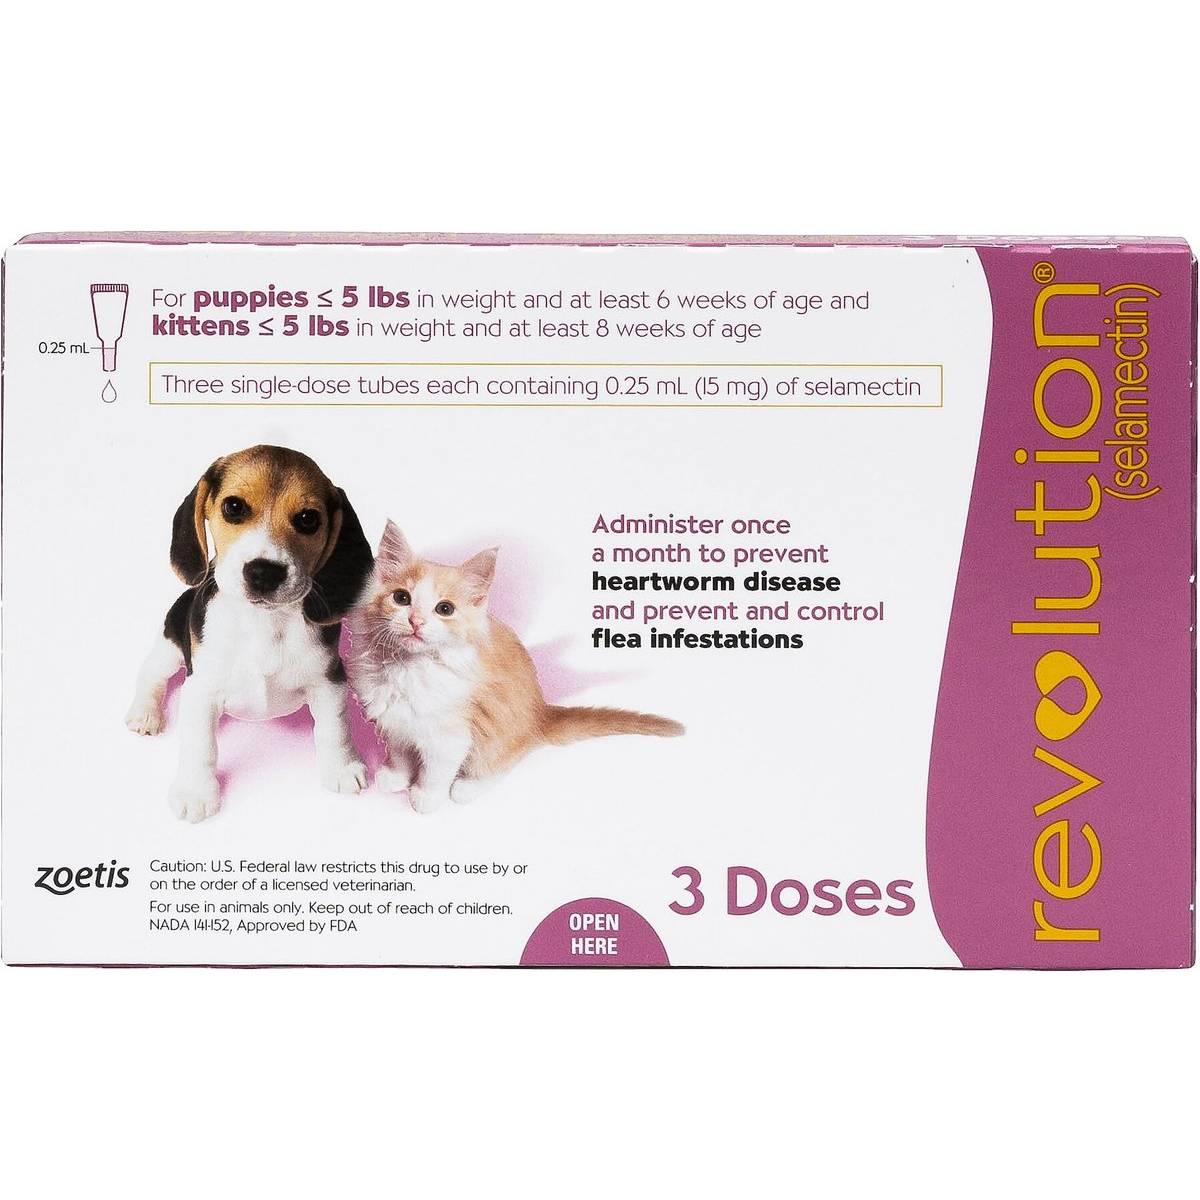 Revolution Topical Solution for Kittens & Puppies, under 5 lbs, (Mauve Box) new